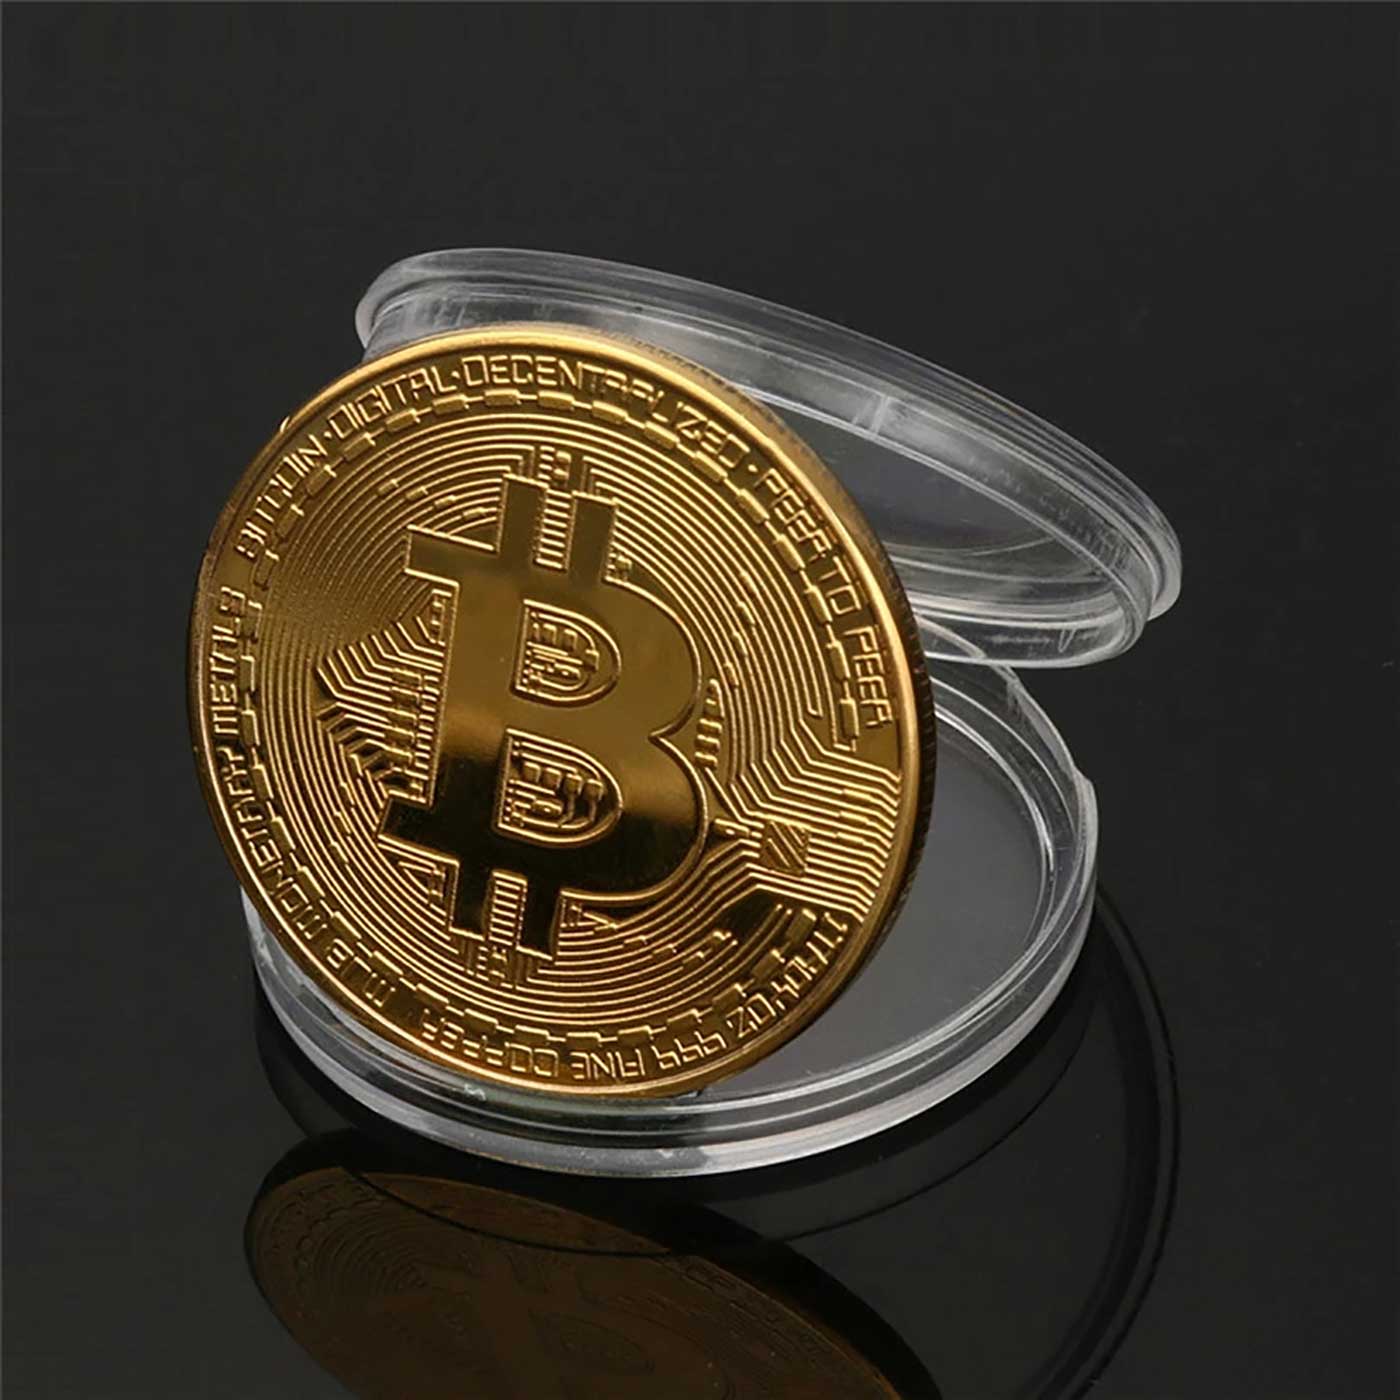 Bitcoin Gold & Silver Gift Set Collectors Edition 40mm Coin Includes a Keychain